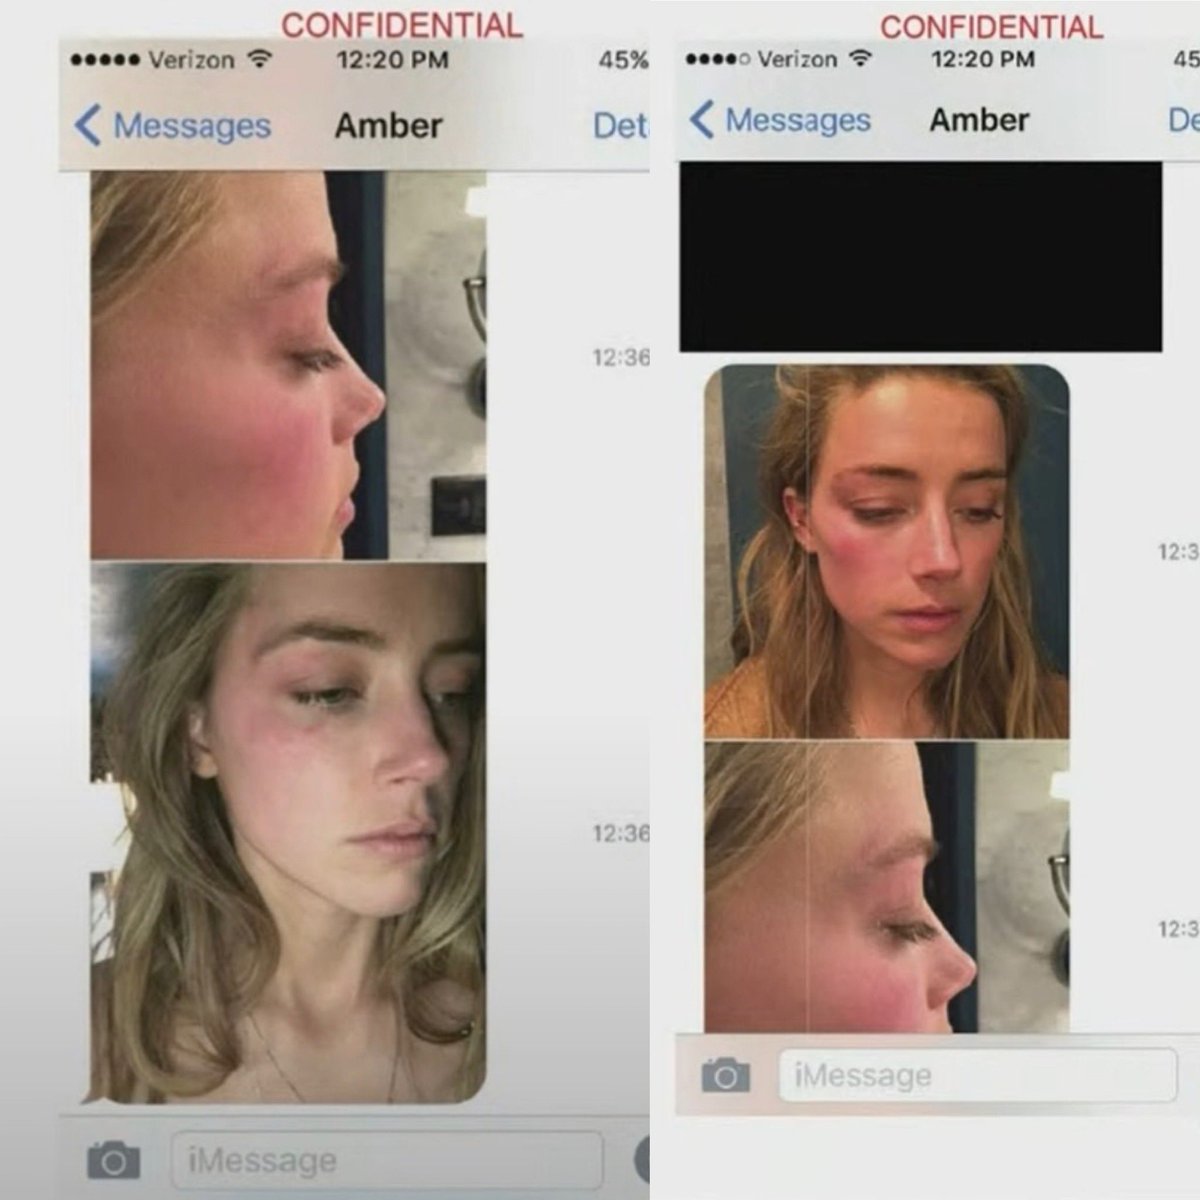 Following the May 21 2016 altercation, Amber texts nurse Erin Boerum that Depp hit her in the face several times and provides photos of her injuries. A medical report confirms the assault. Nurse Boerum would later testify she didn’t believe Amber’s story that Depp was responsible